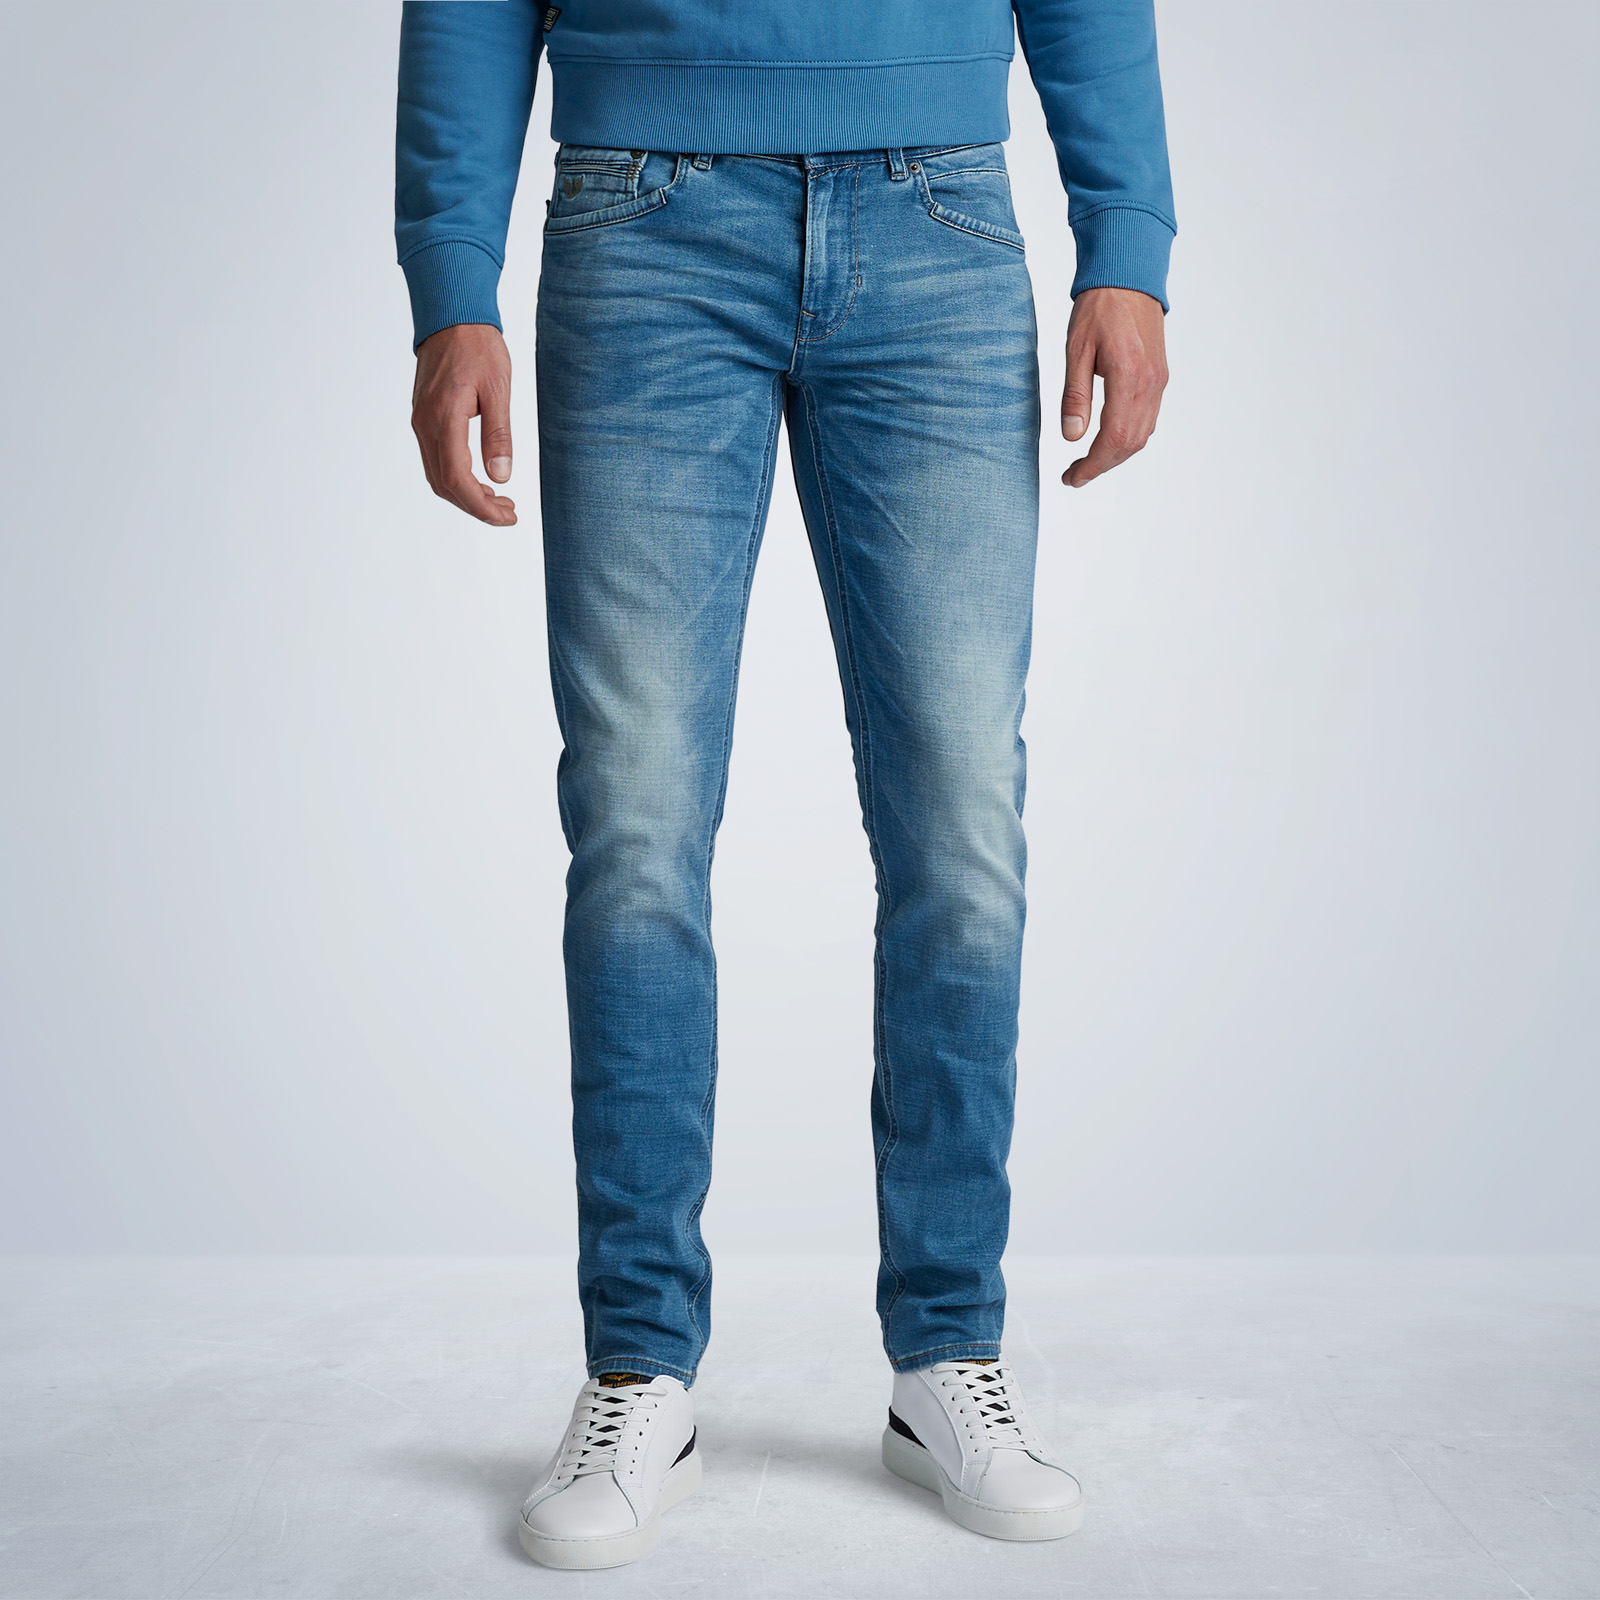 Nauwkeurig Sport totaal PME JEANS | Tailwheel Soft Mid Blue Jeans | Free delivery